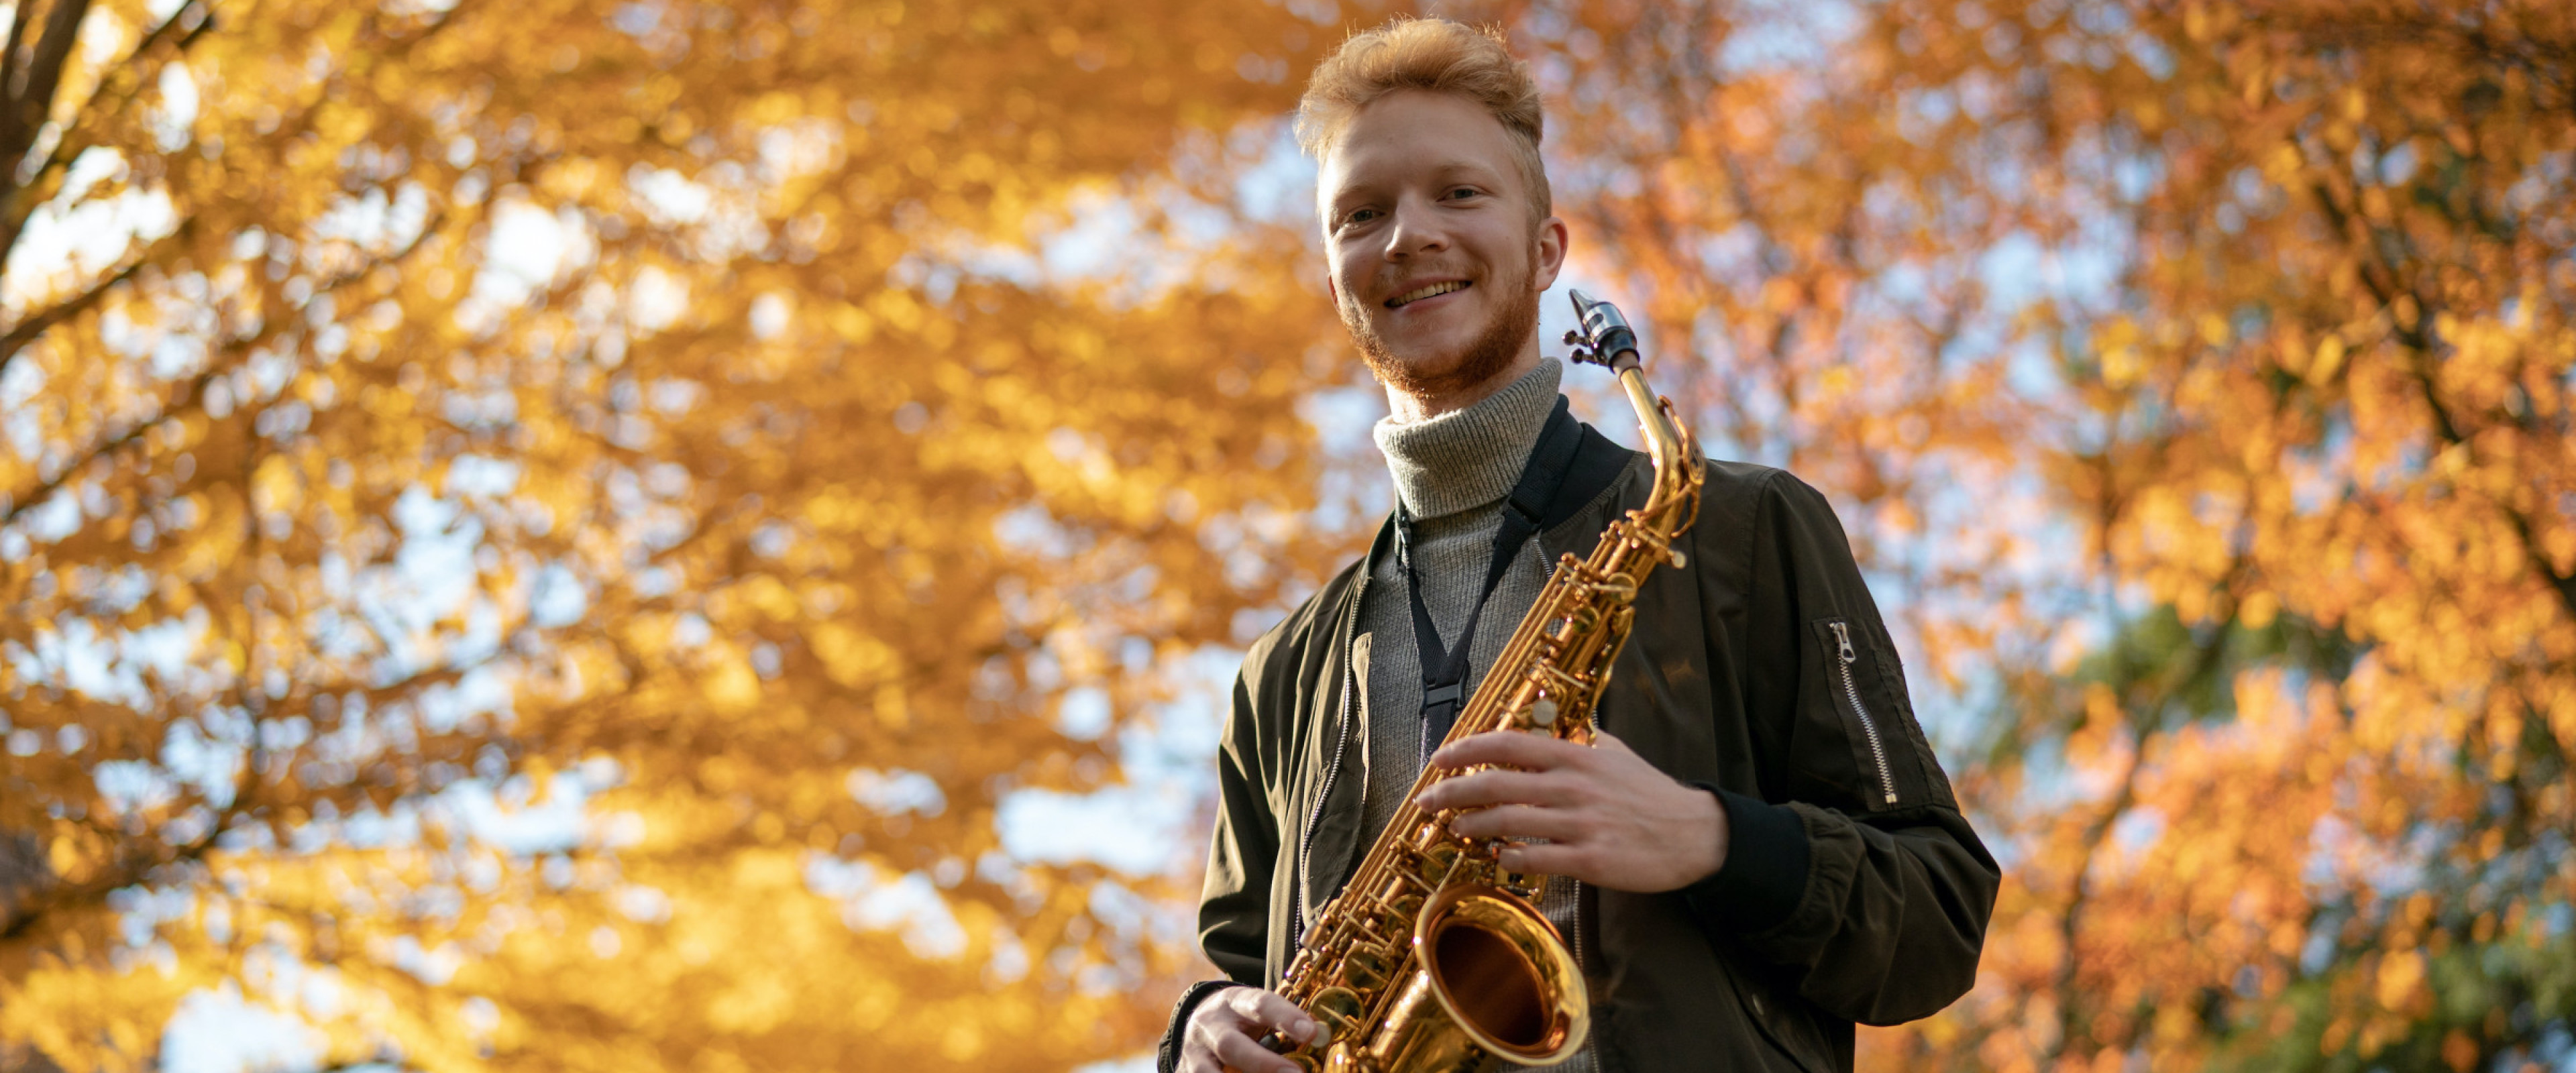 A student performer posing with a saxophone in front of fall foliage